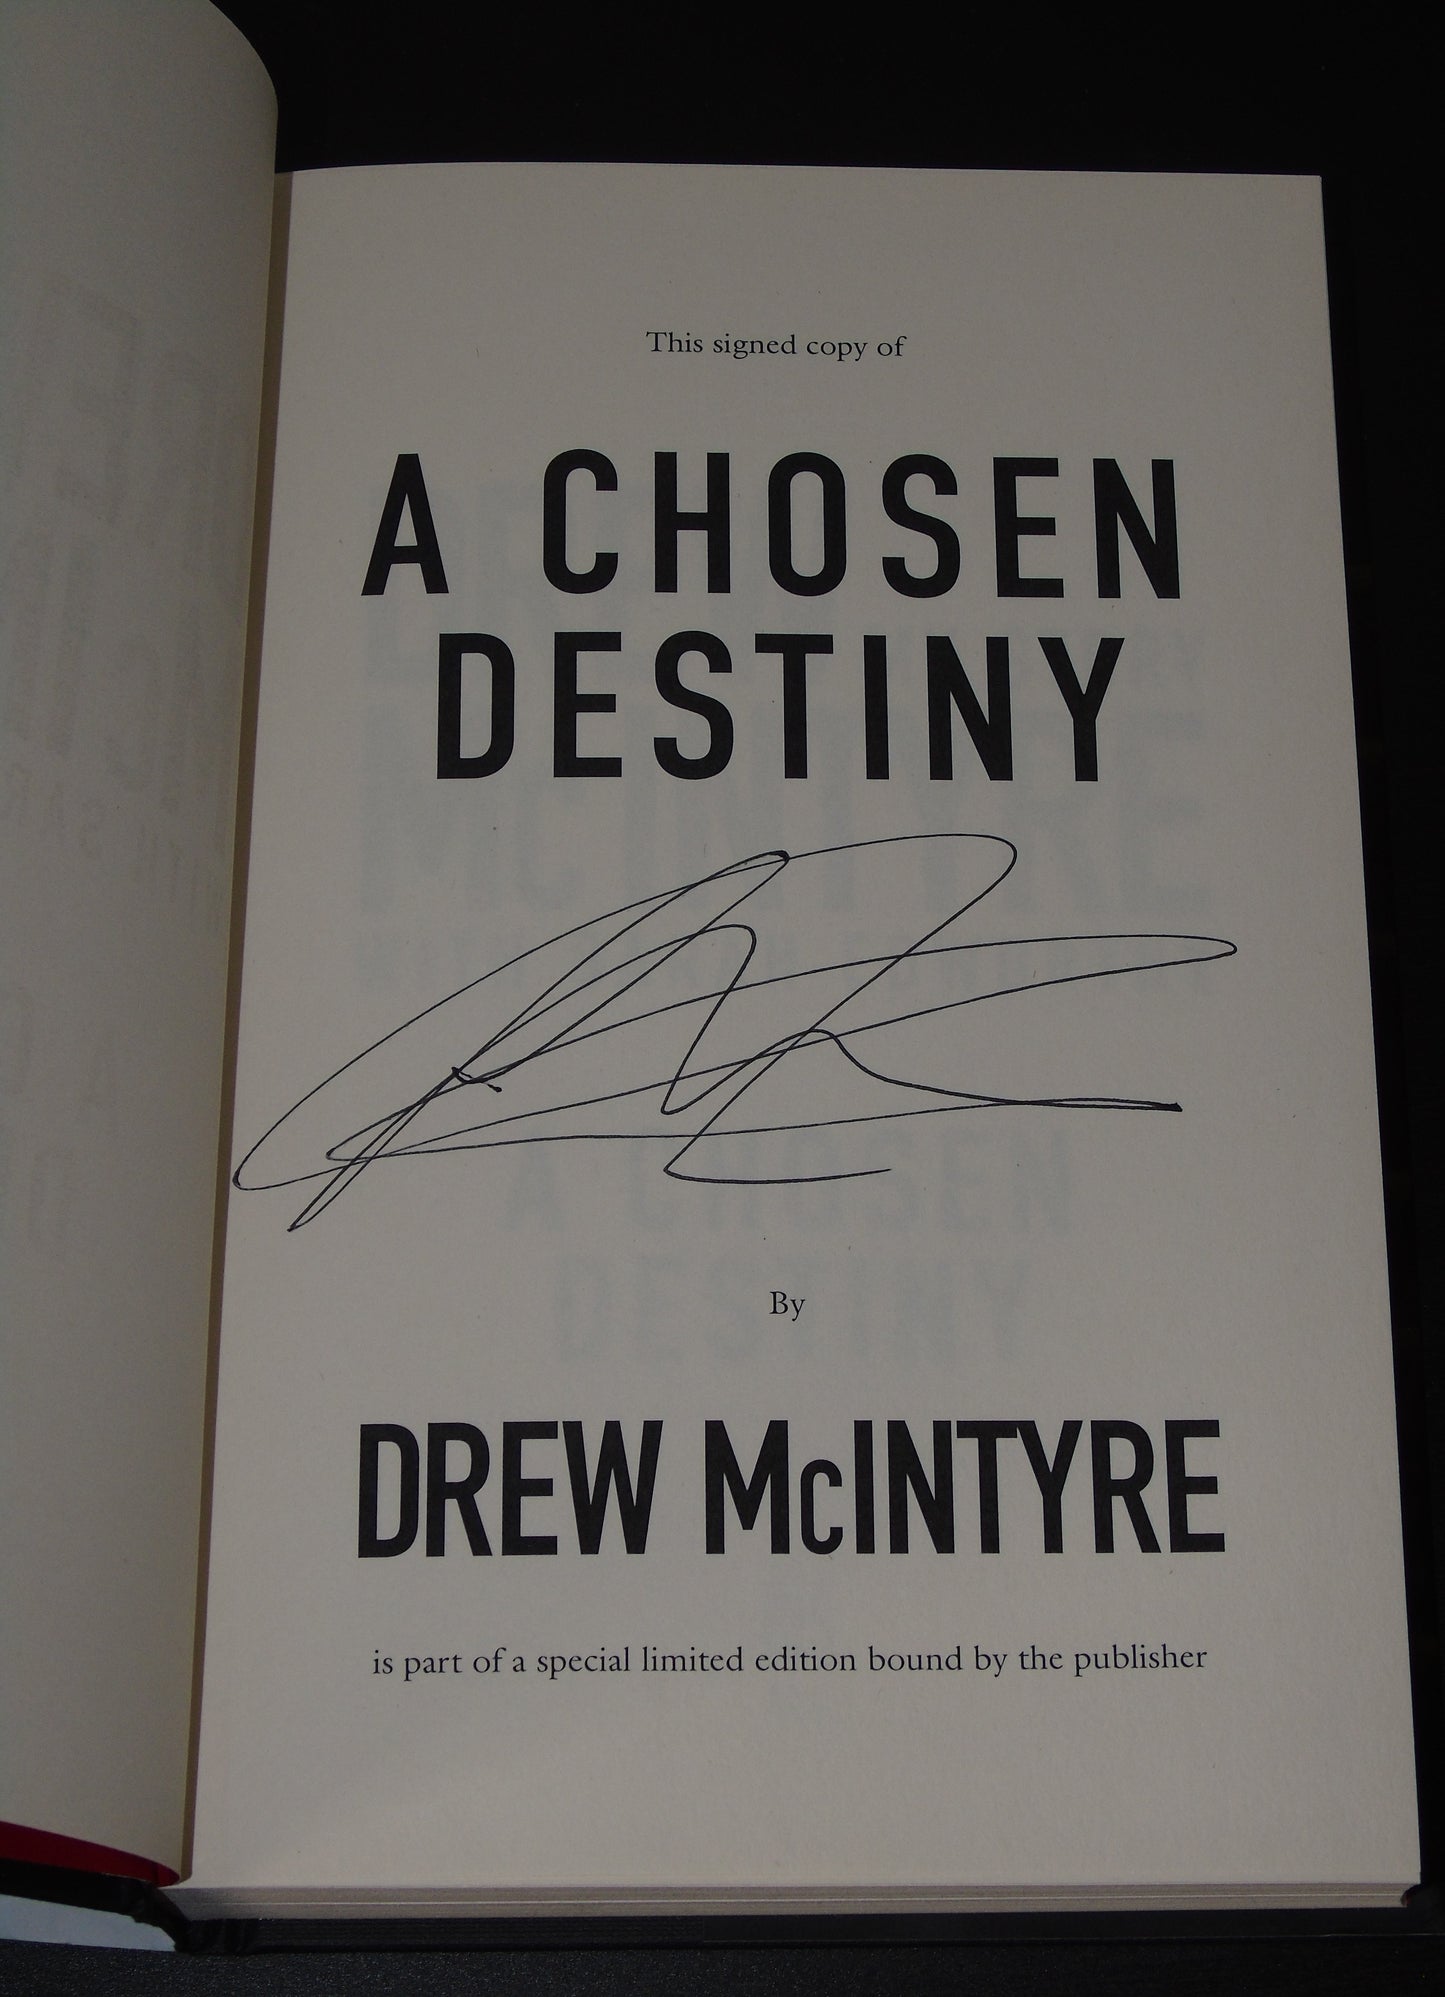 Drew McIntyre WWE Signed Limited Edition Autobiography Book